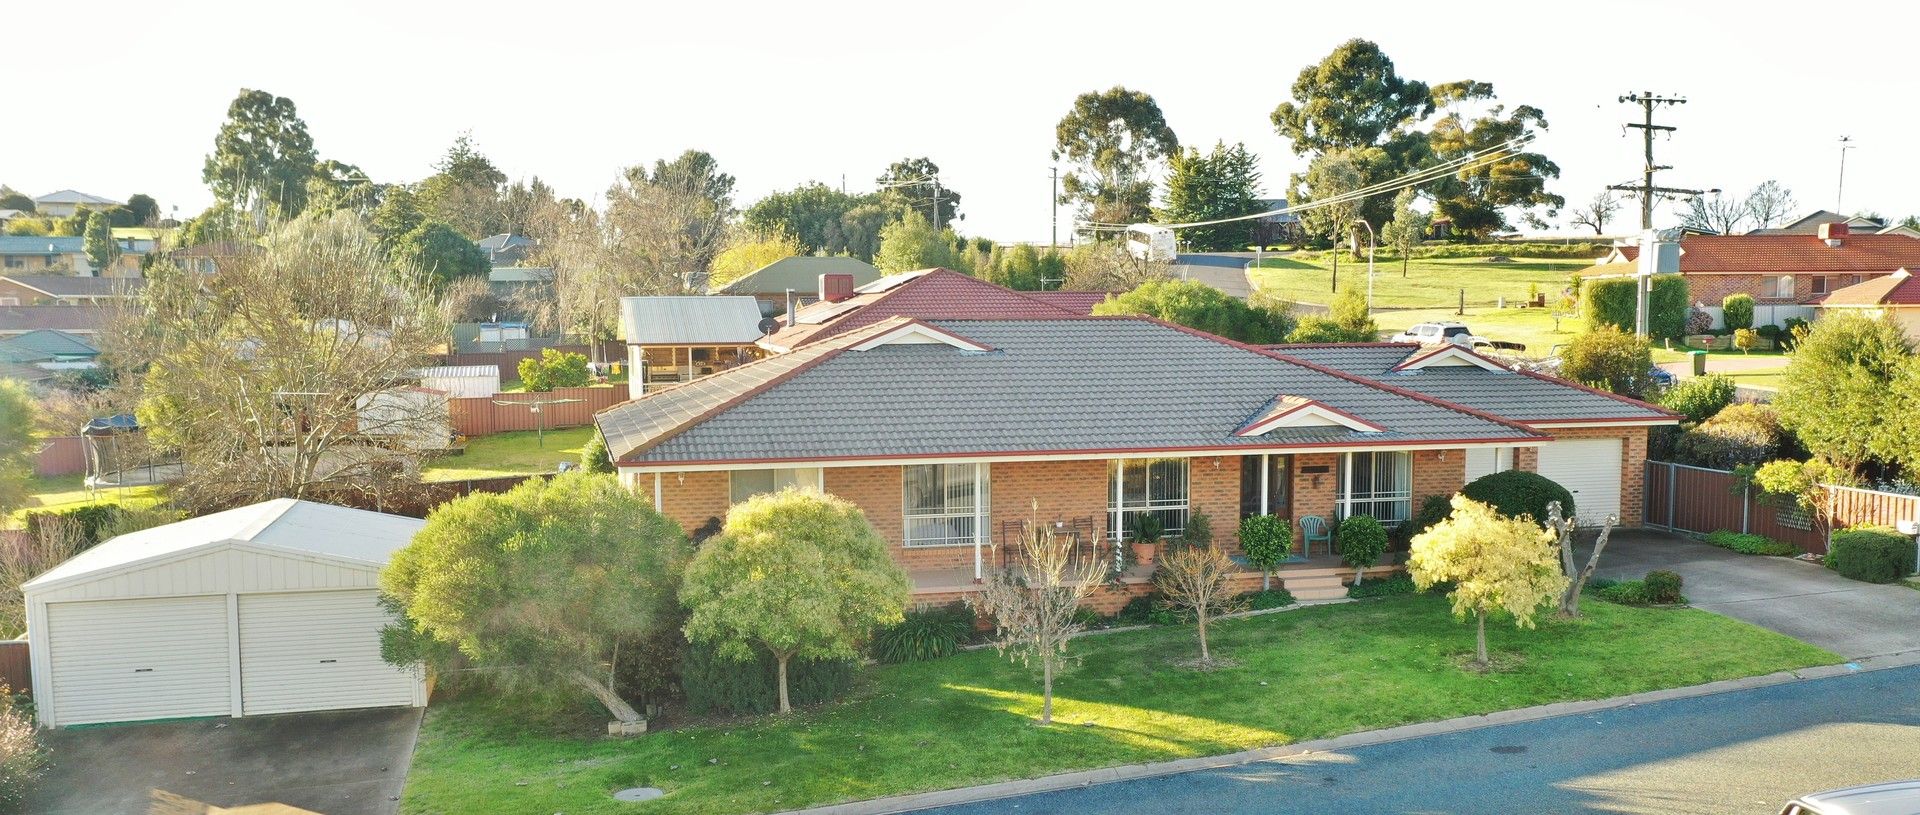 1 Sarah Cooper Drive, Young NSW 2594, Image 0